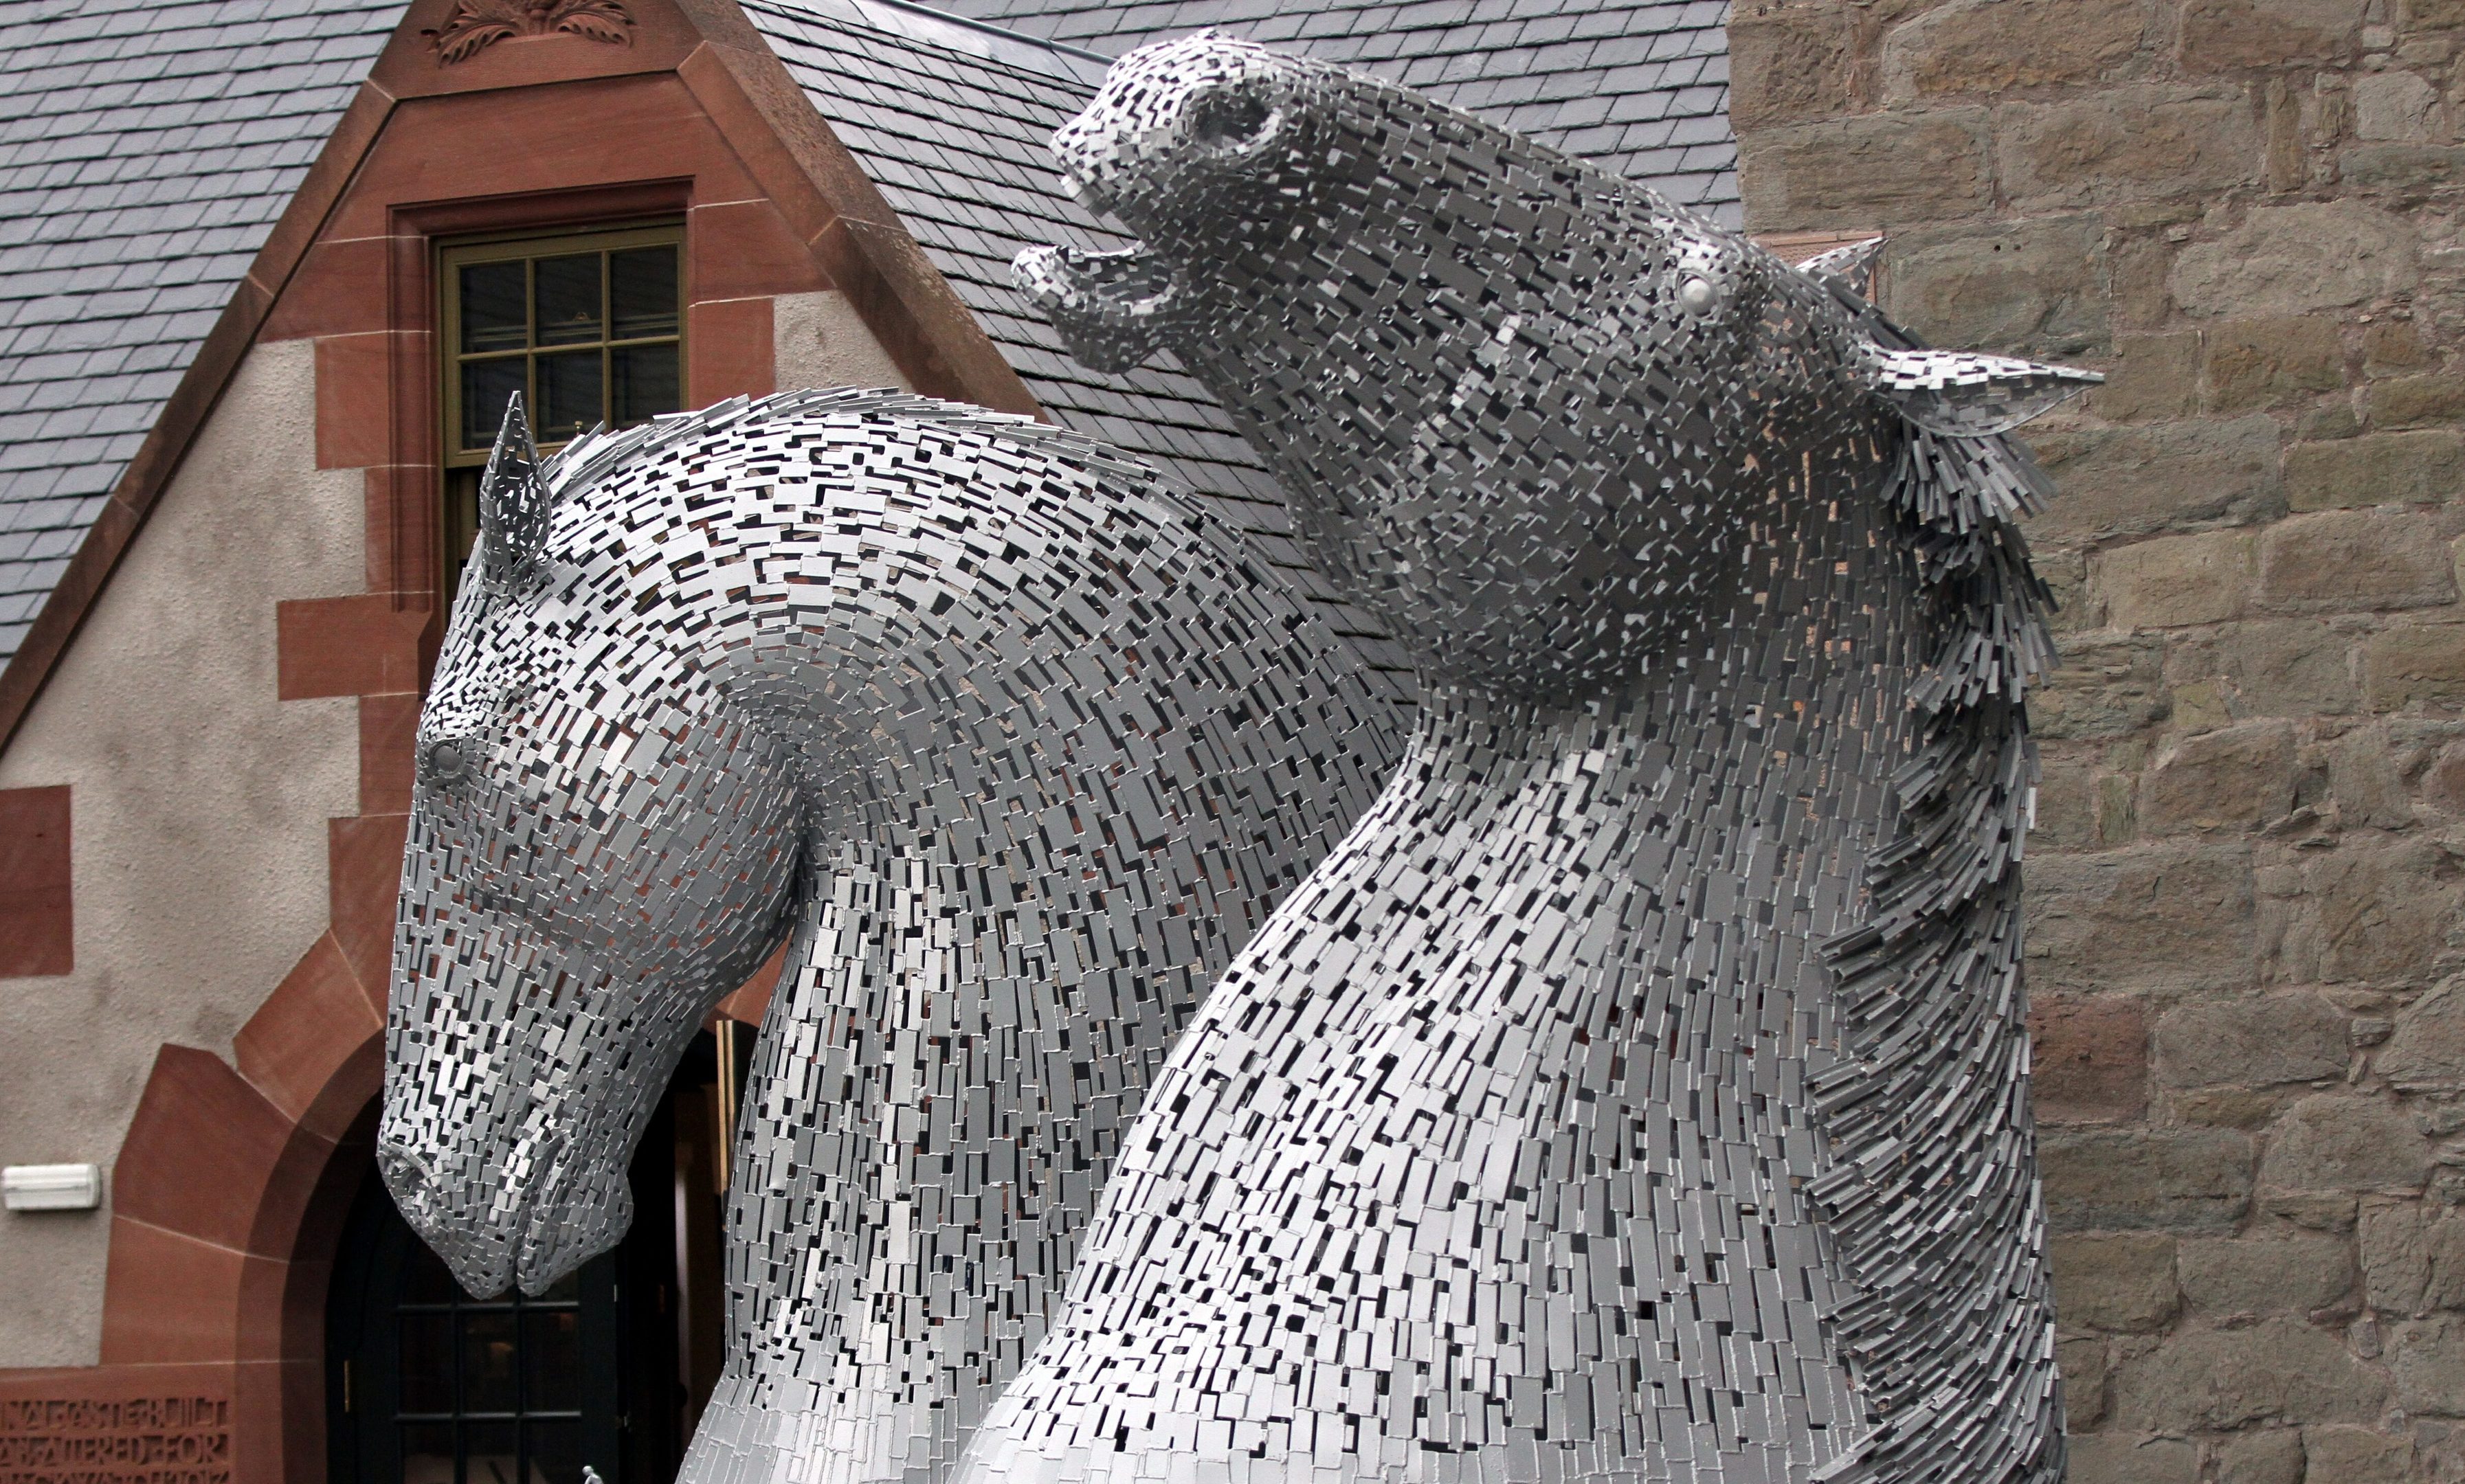 The mini Kelpies on display outside the Black Watch Museum in Perth.